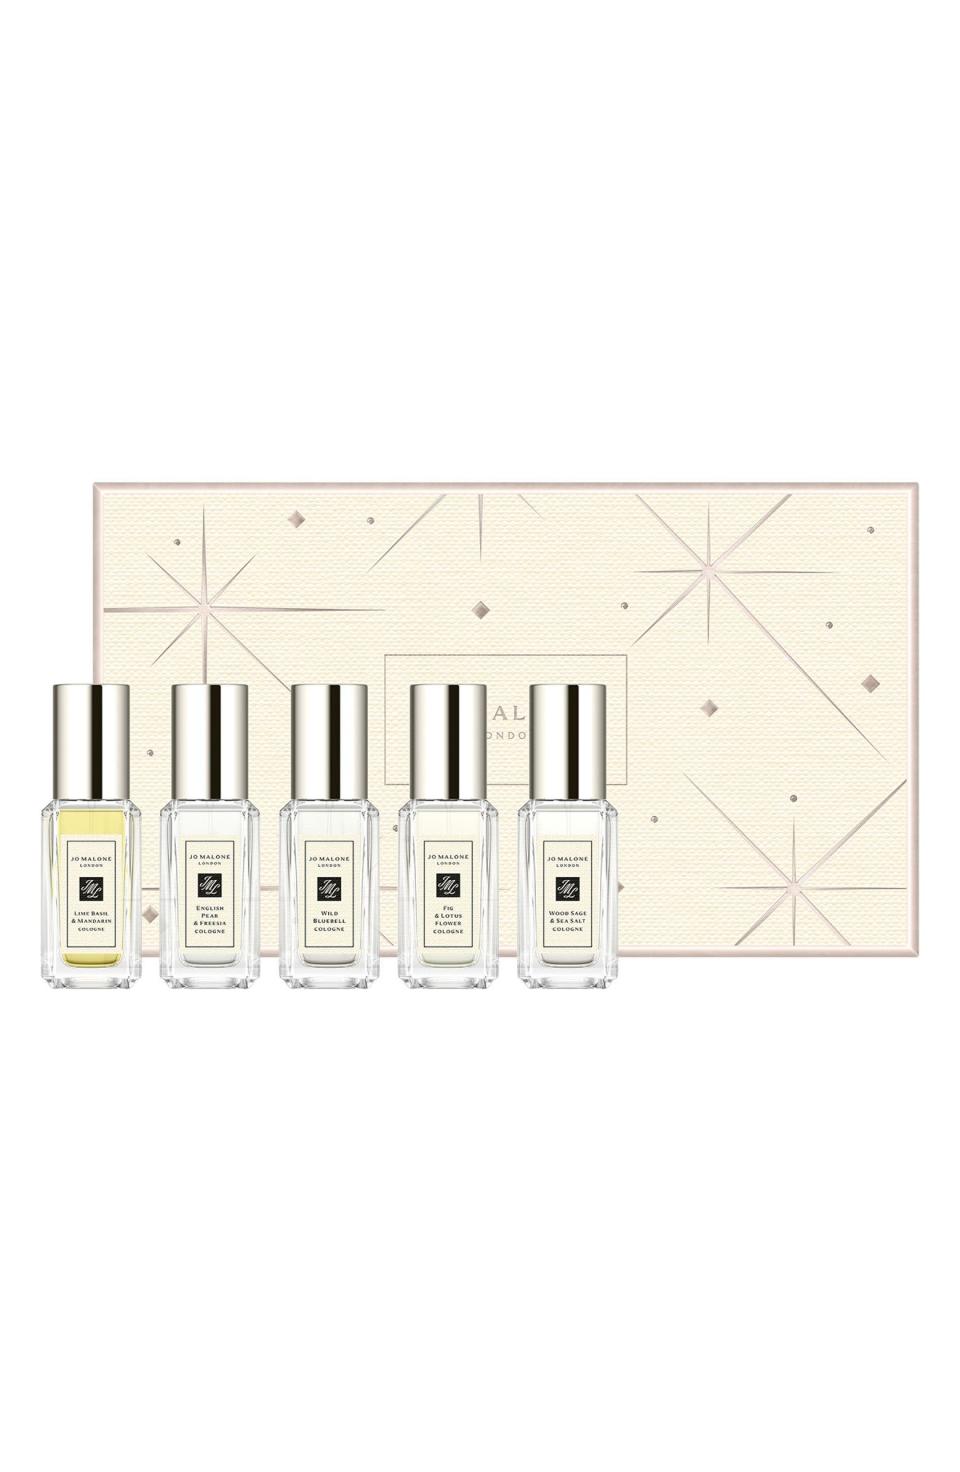 <h3>Jo Malone London Travel Size Cologne Set</h3><br><br>Classic and elegant, this Jo Malone London set includes: the signature Lime Basil & Mandarine, the fresh English Pear & Freesia, the floral-packed Wild Bluebell and Fig & Lotus Flower, and the musky Wood Sage & Sea Salt colognes. They're perfect for everyday wear by themselves or layered with each other.<br><br><em>Shop <strong><a href="https://www.nordstrom.com/" rel="nofollow noopener" target="_blank" data-ylk="slk:Nordstrom" class="link rapid-noclick-resp">Nordstrom</a></strong></em><br><br><strong>Jo Malone London</strong> Travel Size Cologne Set, $, available at <a href="https://go.skimresources.com/?id=30283X879131&url=https%3A%2F%2Fwww.nordstrom.com%2Fs%2Fjo-malone-london-travel-size-cologne-set%2F6493650" rel="nofollow noopener" target="_blank" data-ylk="slk:Nordstrom" class="link rapid-noclick-resp">Nordstrom</a>